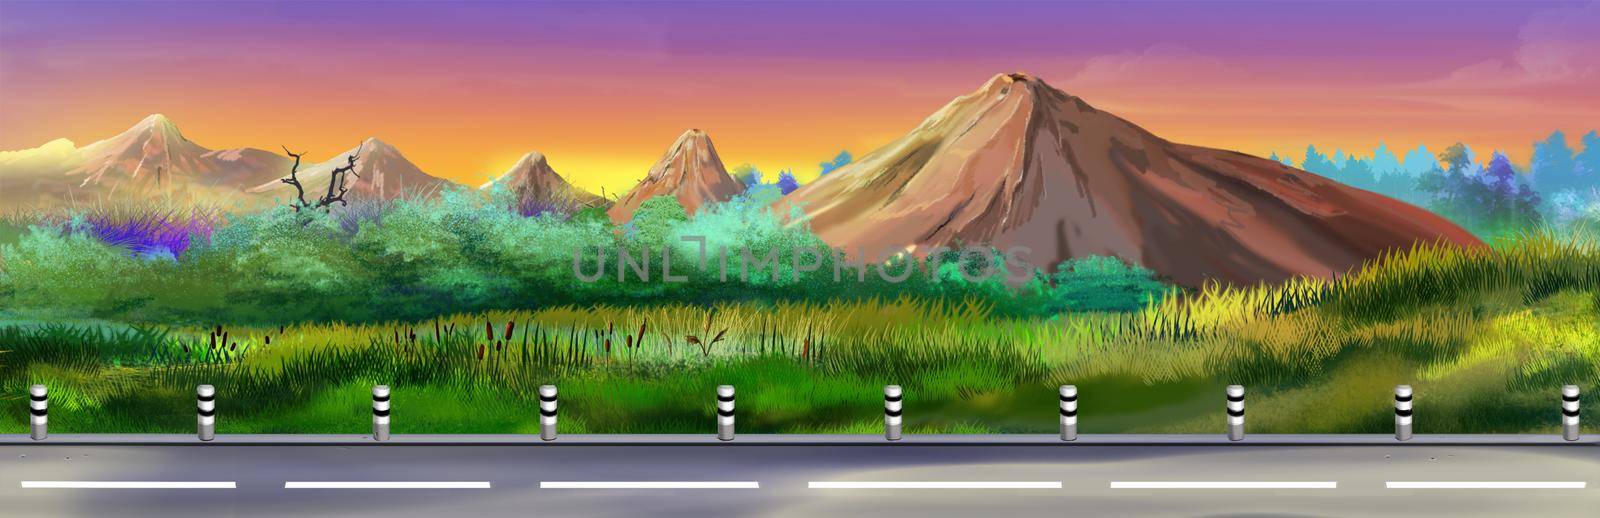 Scenic road in the mountains illustration by Multipedia